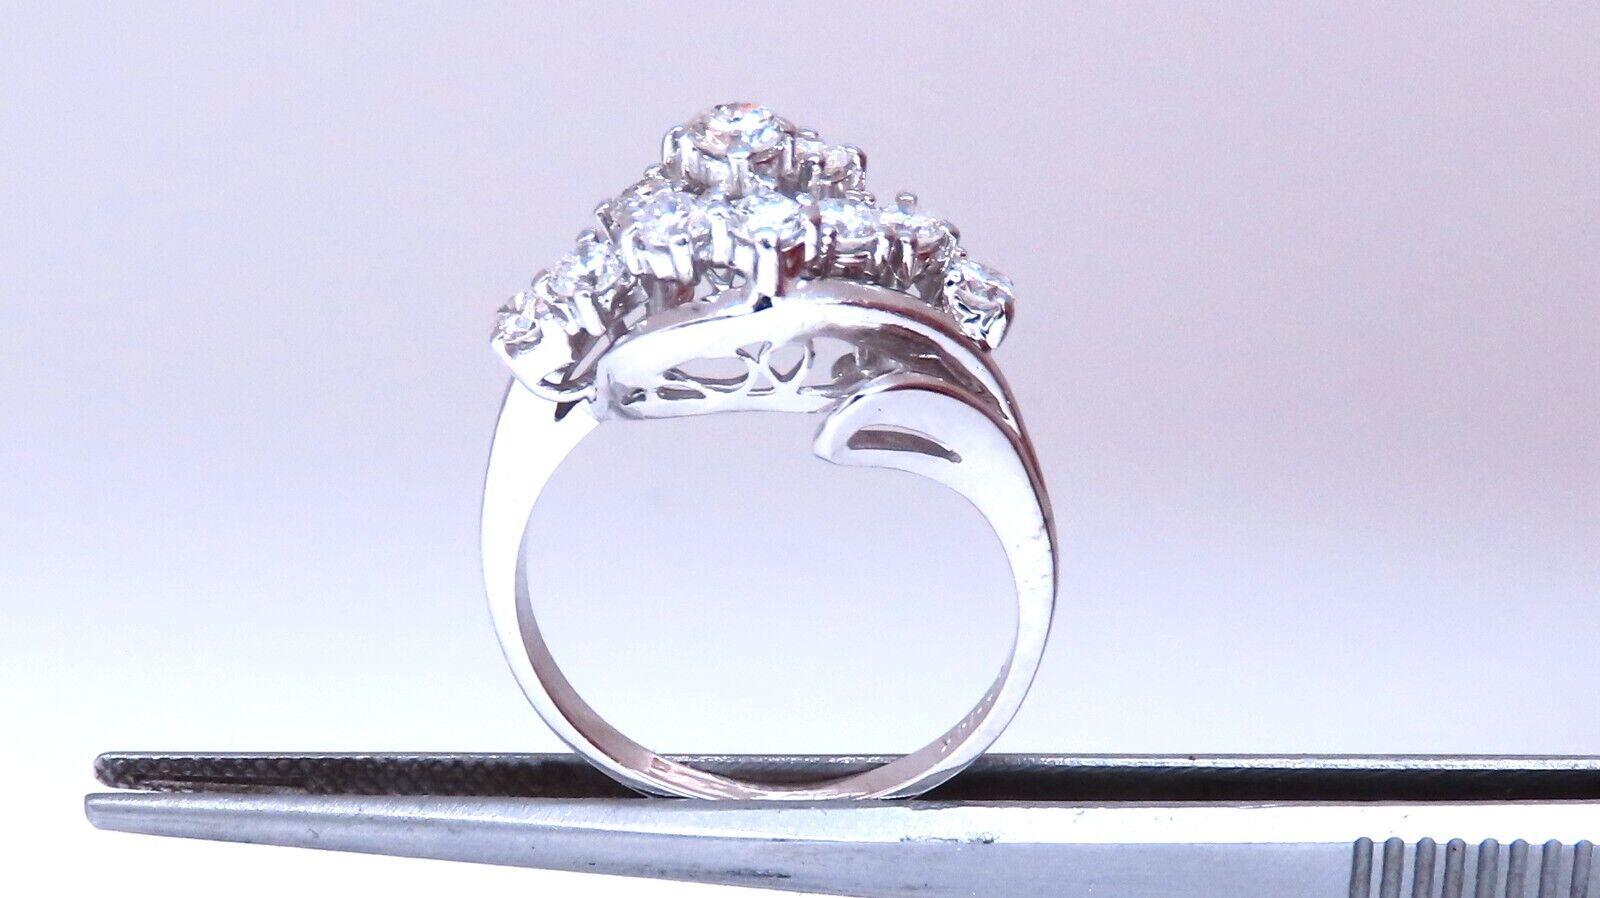 .80ct Natural round Cut Diamond Ring

vs-2 clarity G color.

14kt white gold

5.5 Grams

Depth: 9.8mm

Ring is 11mm wide

Current ring size: 8.25

May professionally resize, please inquire.

$4500 appraisal will accompany